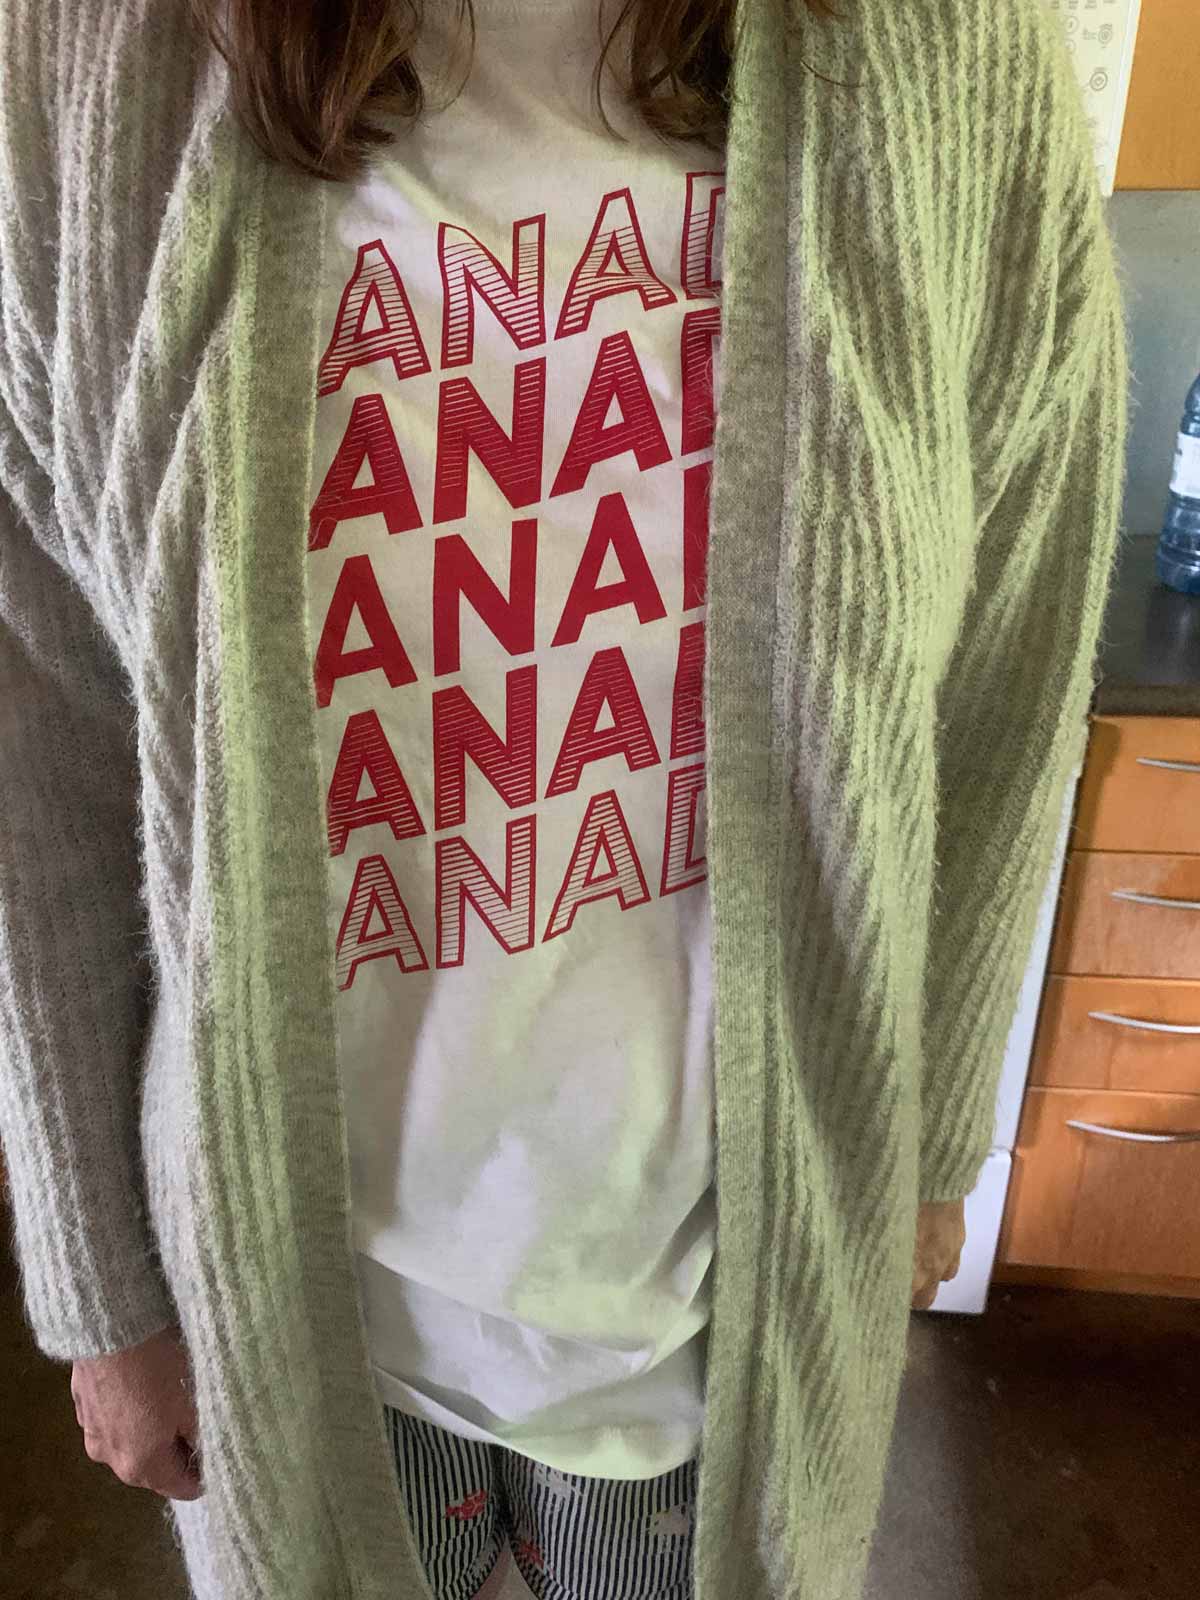 I told my wife she shouldn't wear a sweater with her Canada Day shirt